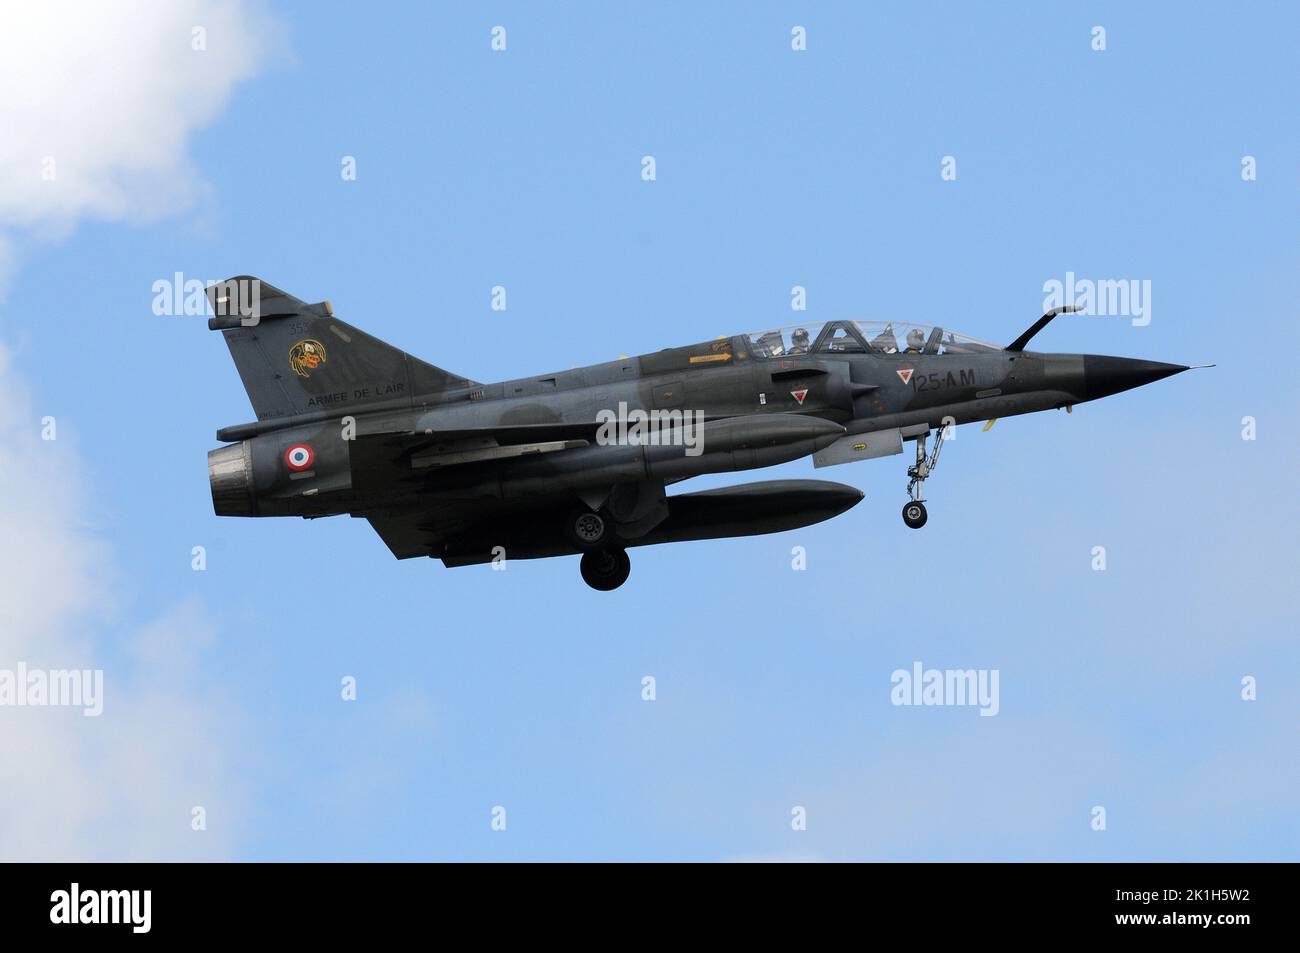 Mirage 2000N of the French Air Force and part of the "Ramex Delta" display team at RIAT, 2015. Only one of the two aircraft displayed on the Sunday du Stock Photo